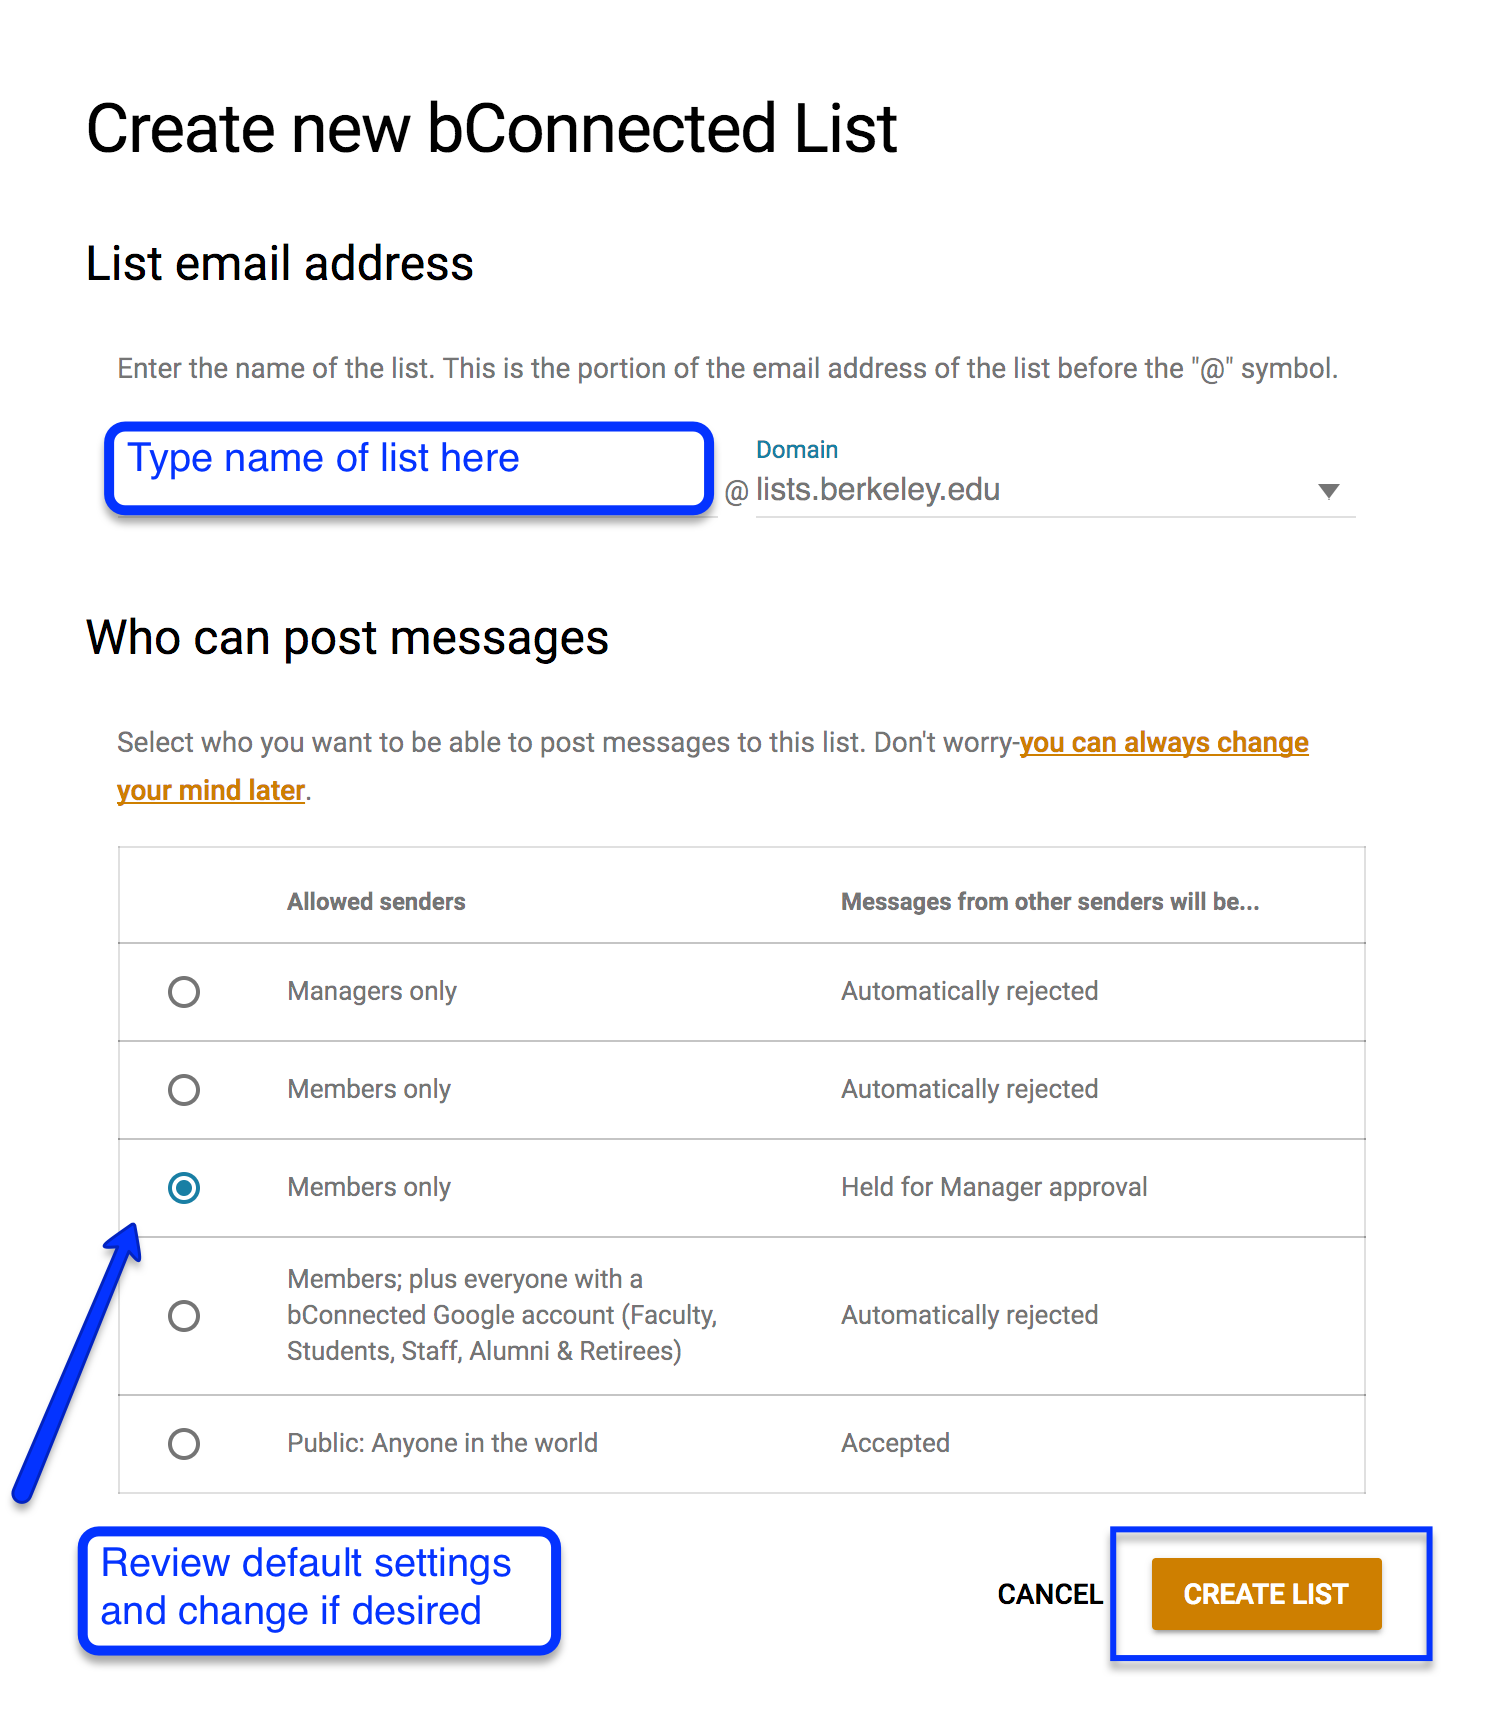 Create new bConnected List